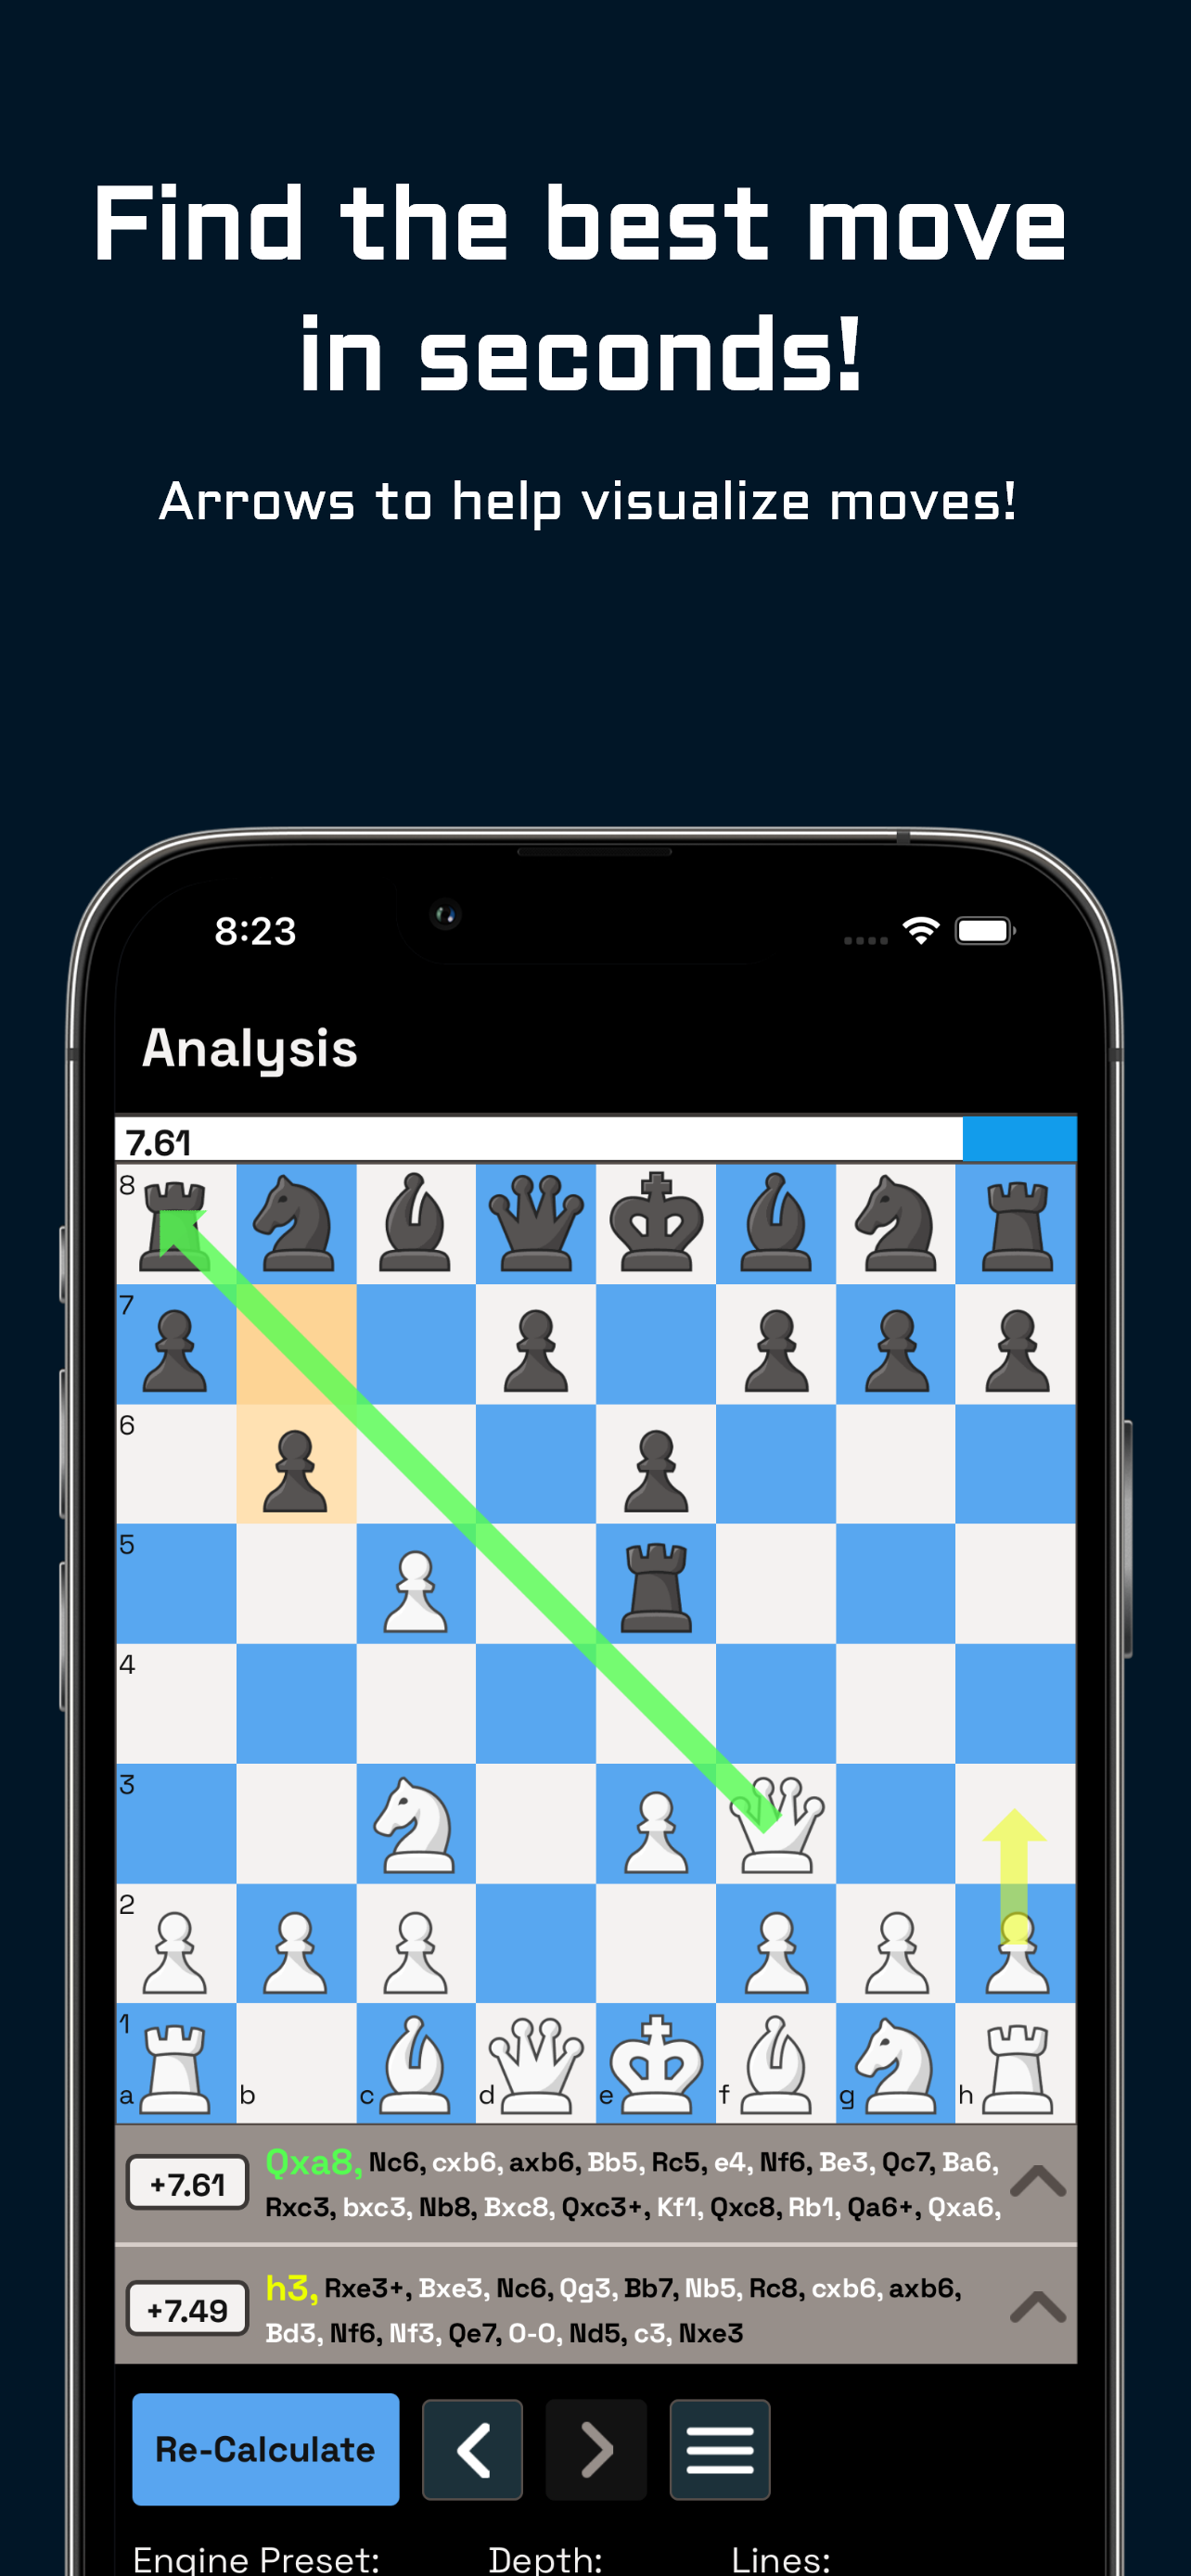 Is there a site or app which can suggest the best next move in a